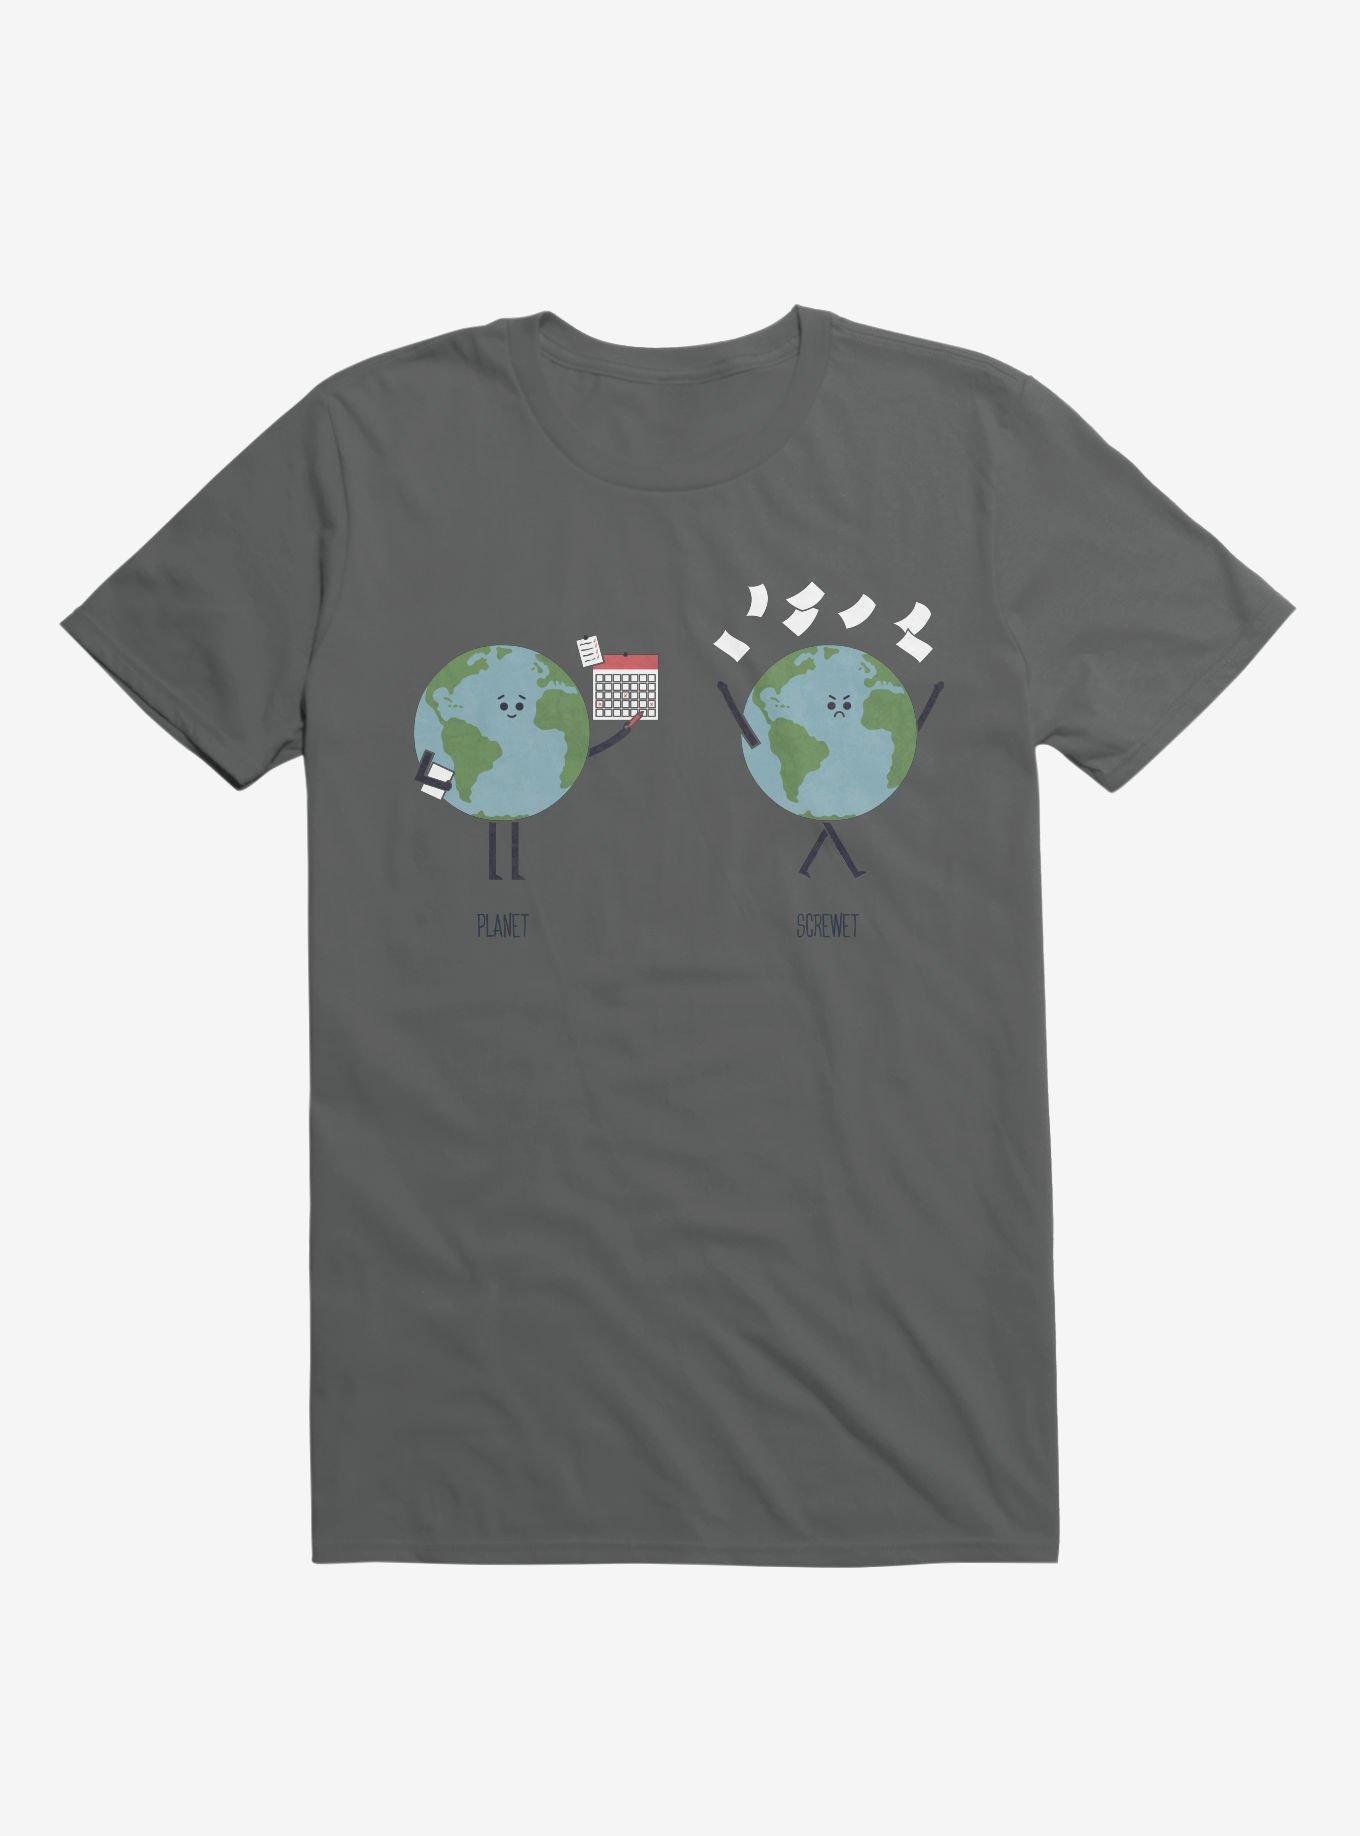 Opposites Planet Screwet Charcoal Grey T-Shirt